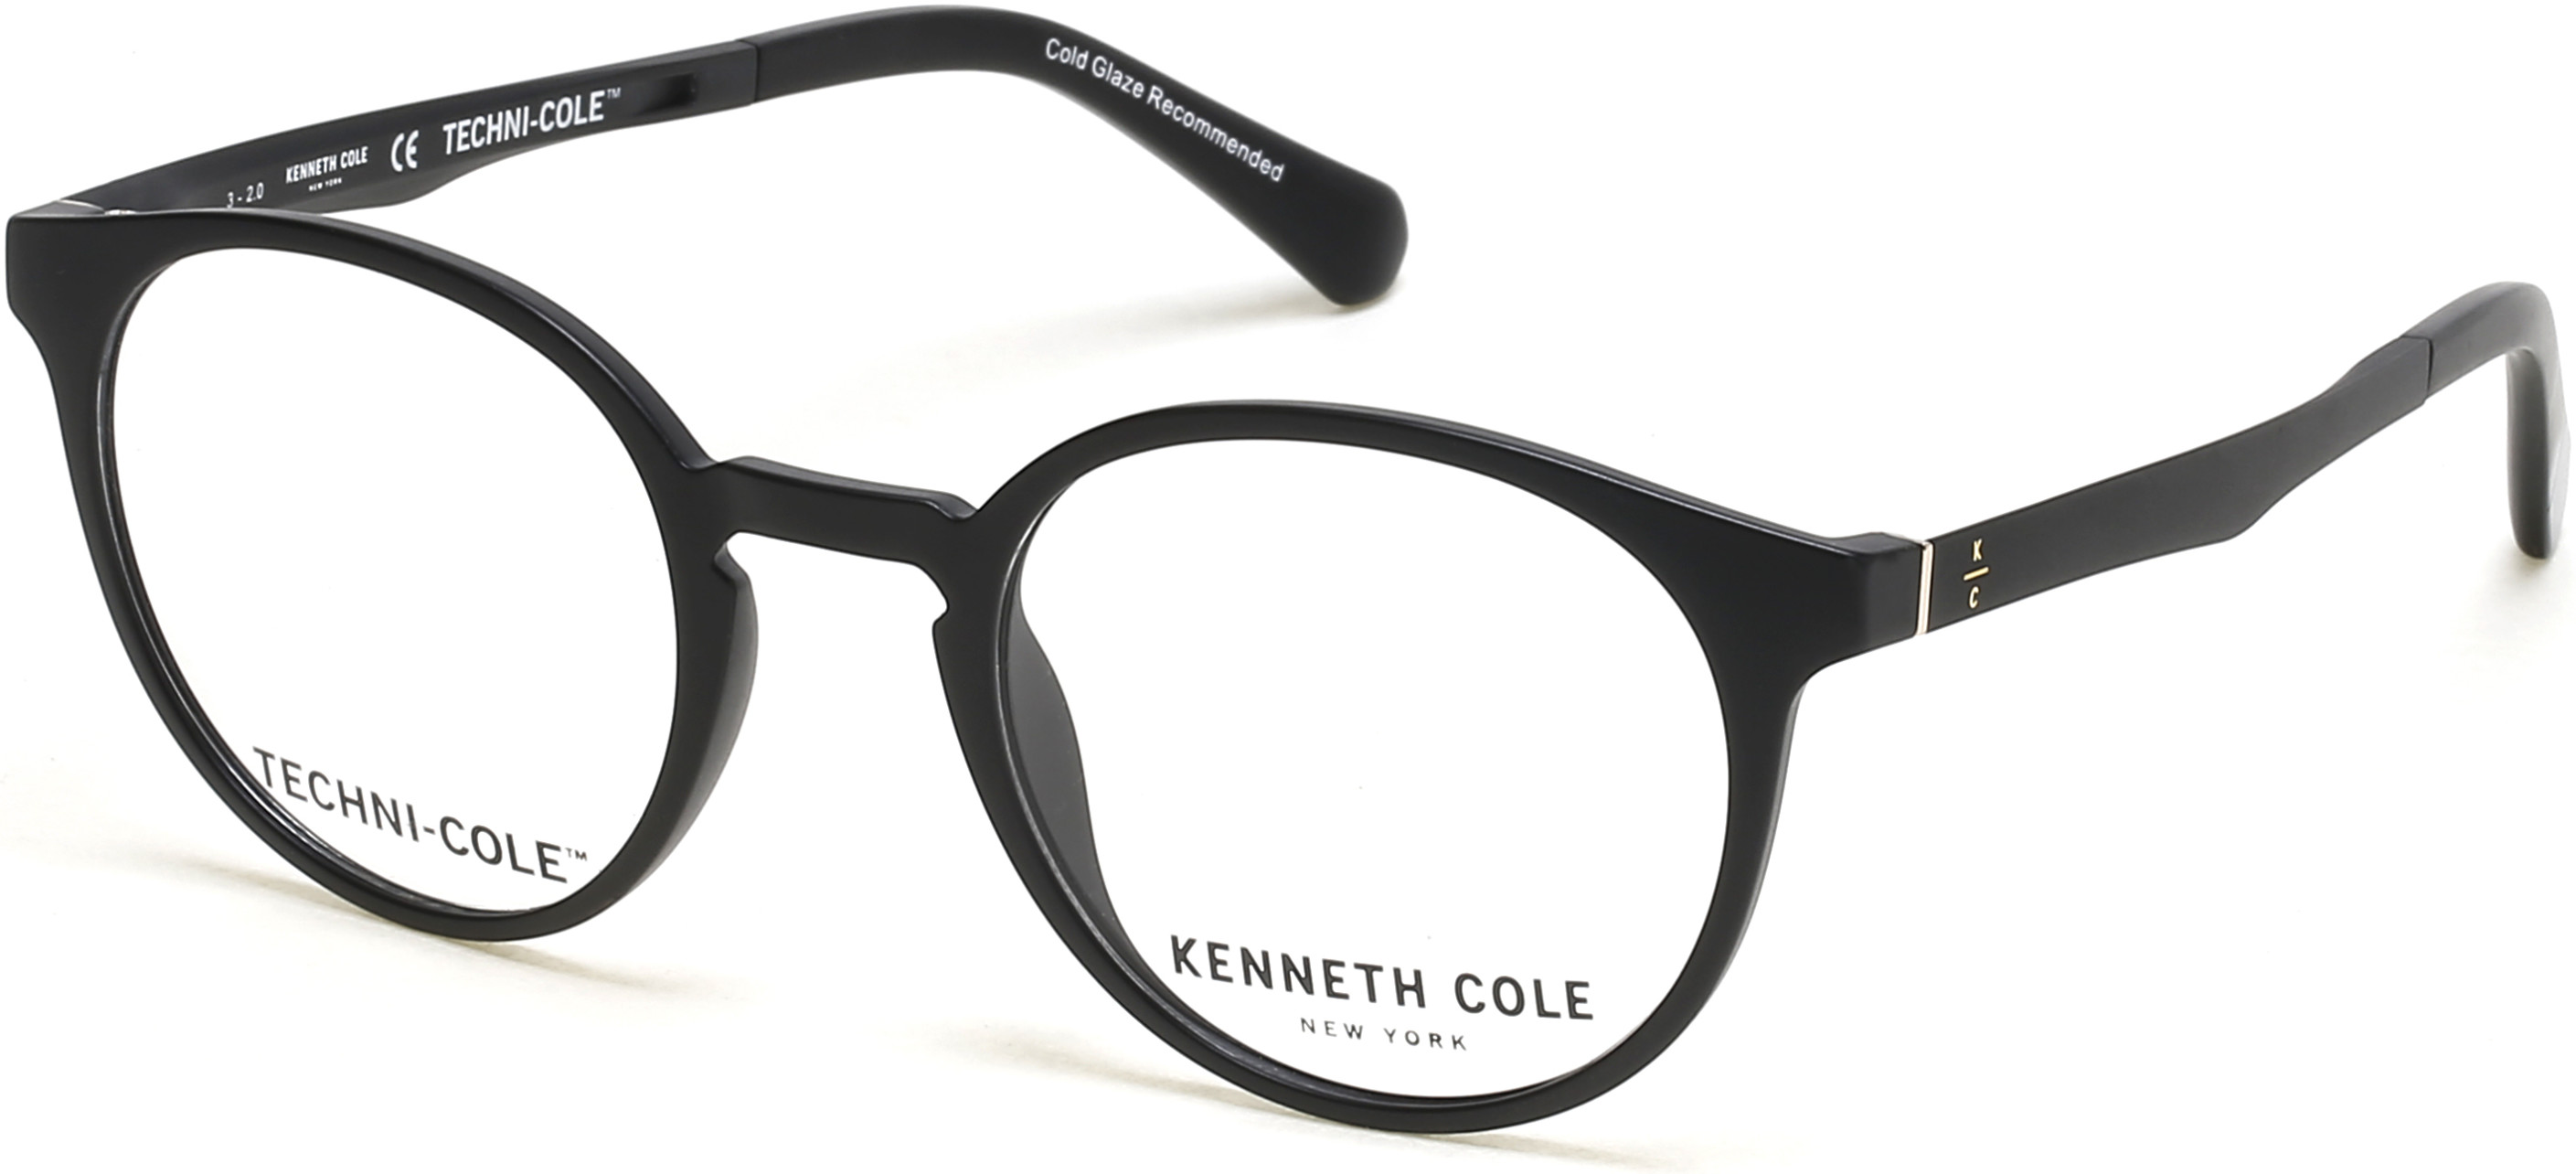 KENNETH COLE NY 0319 002